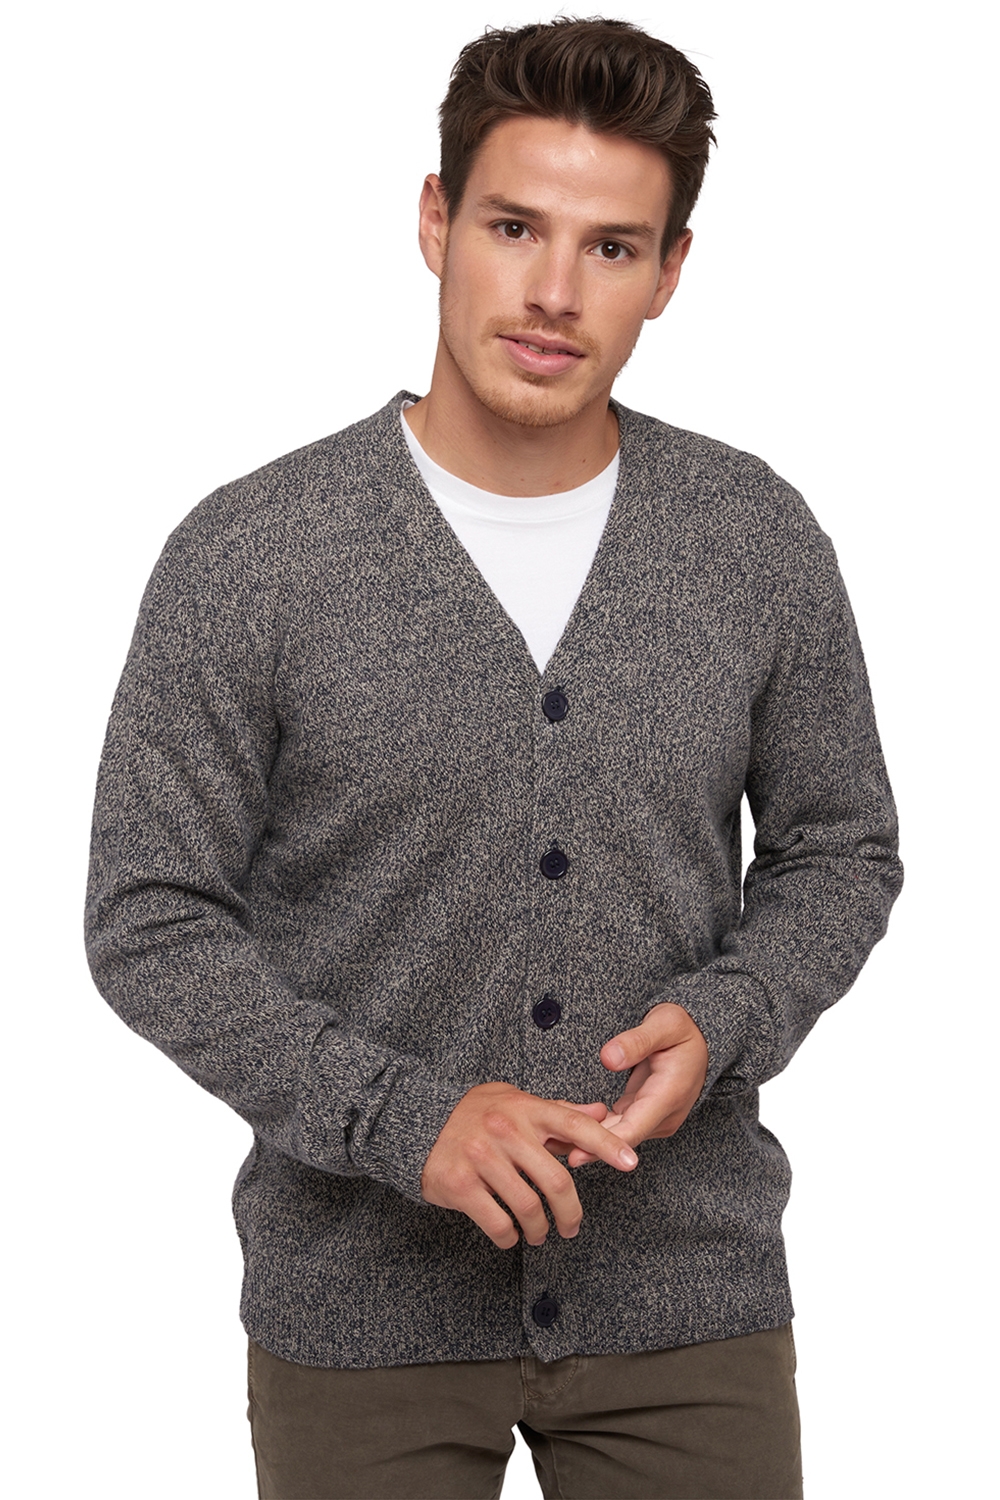 Chameau pull homme cameleon voyage xl